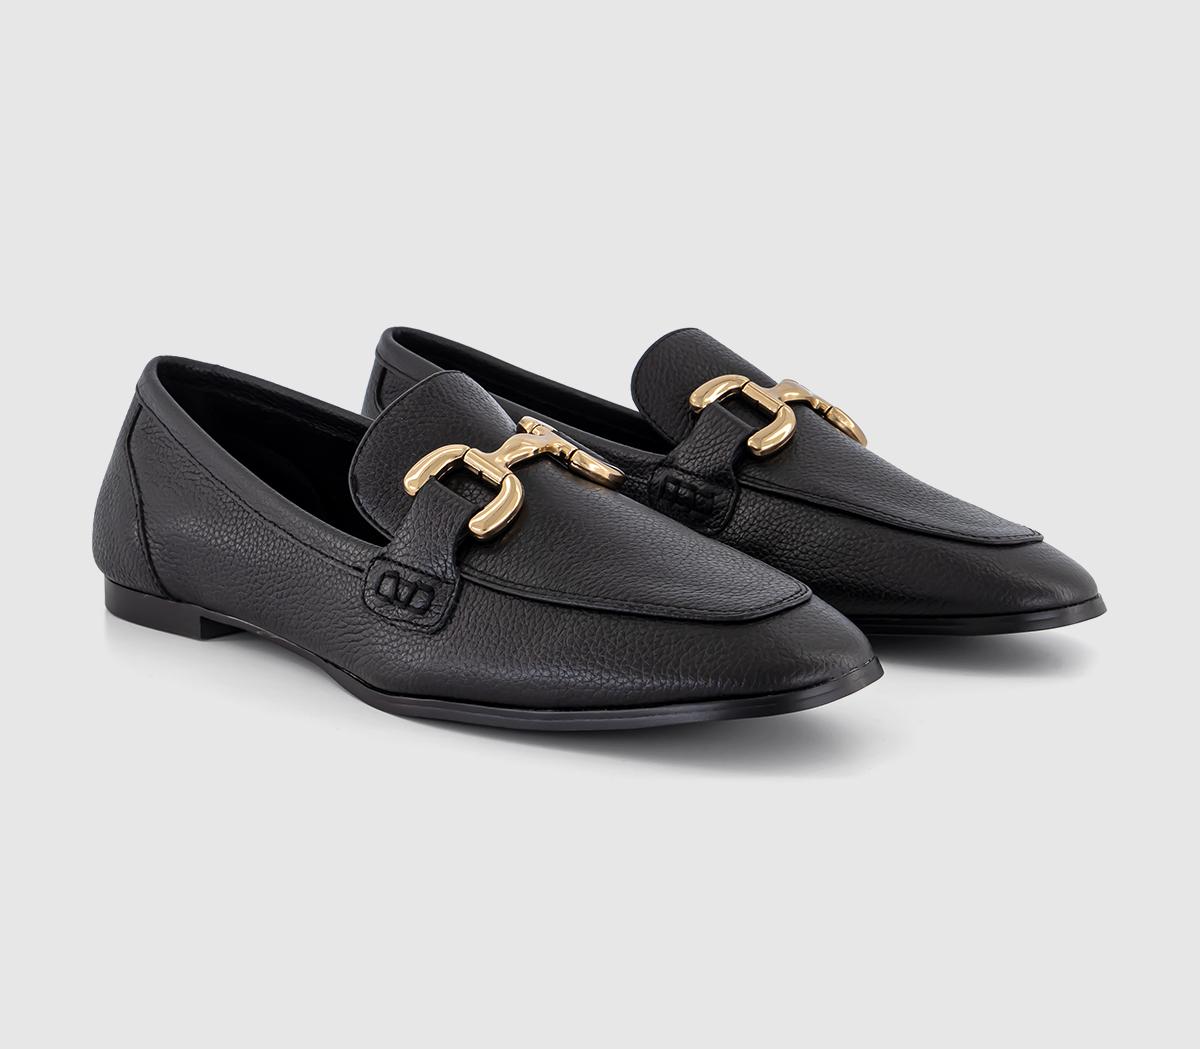 OFFICE Farland Leather Trim Loafers Black Leather - Flat Shoes for Women